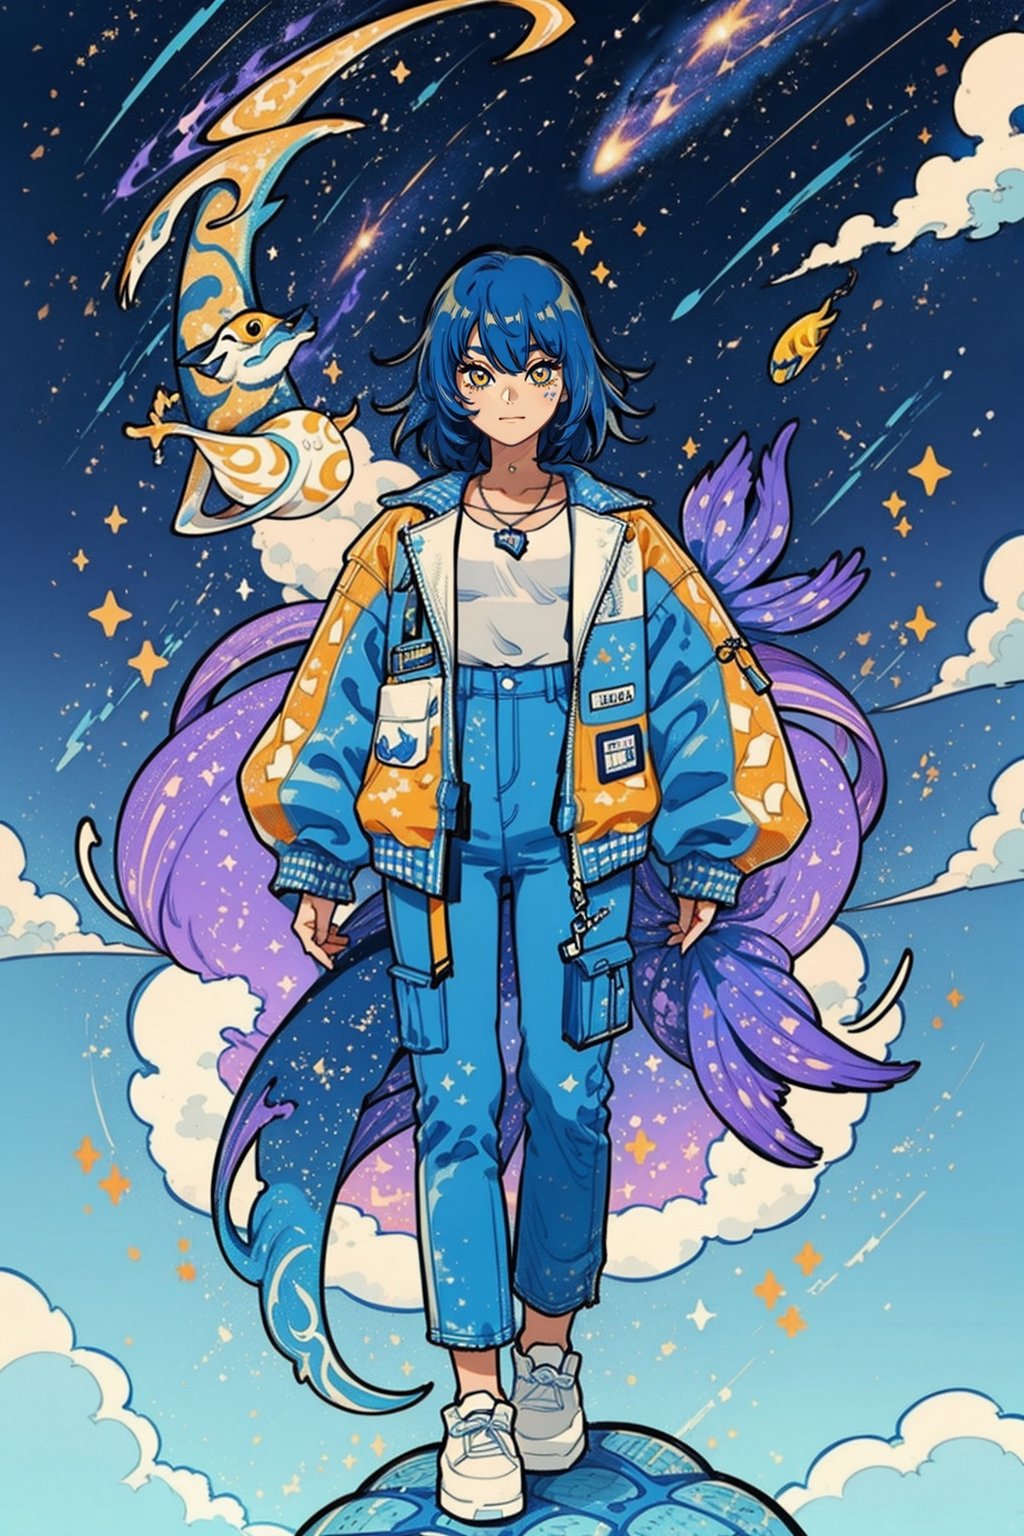 fujimotostyle, woman with blue hair, purple jacket, yellow eyes and tan skin, fish-shaped necklace, standing on the clouds with galaxies in the background, and a floating spider